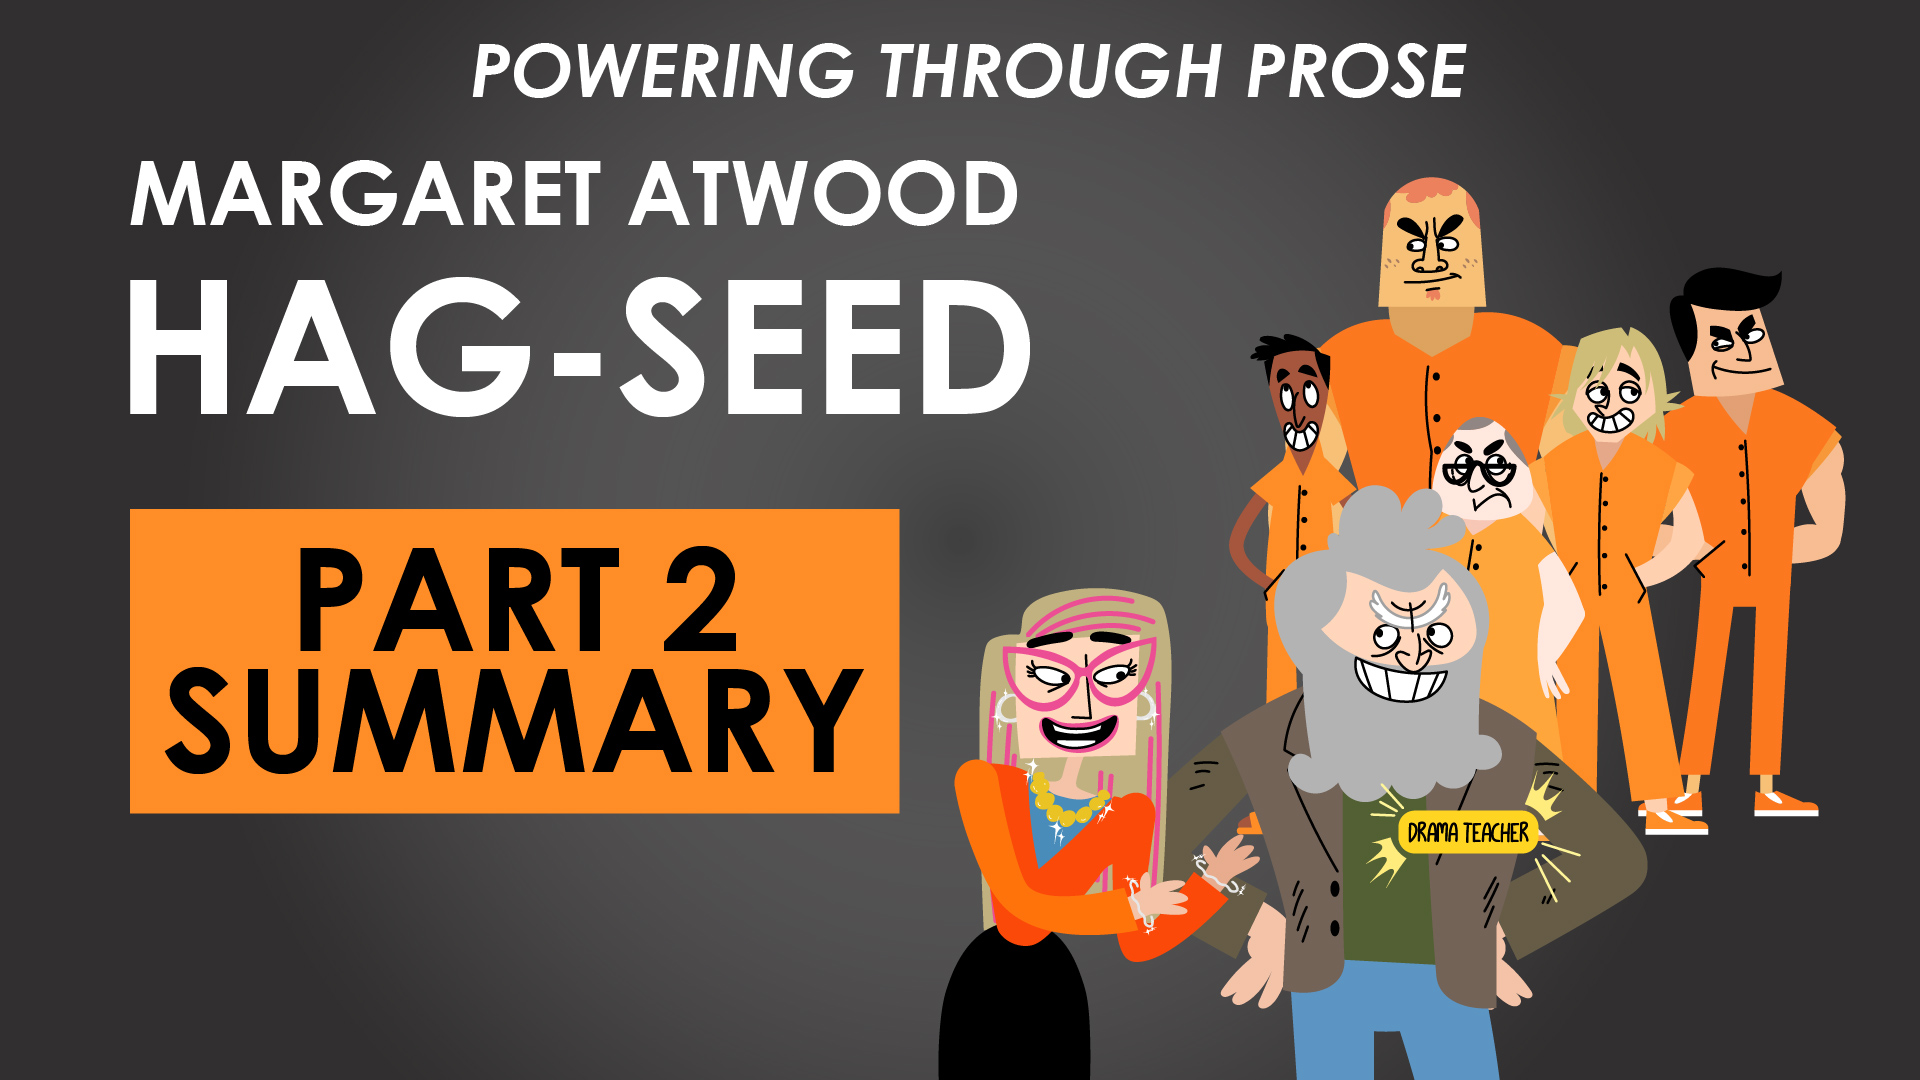 Hag-Seed - Margaret Atwood - Part 2 Summary - Powering through Prose Series